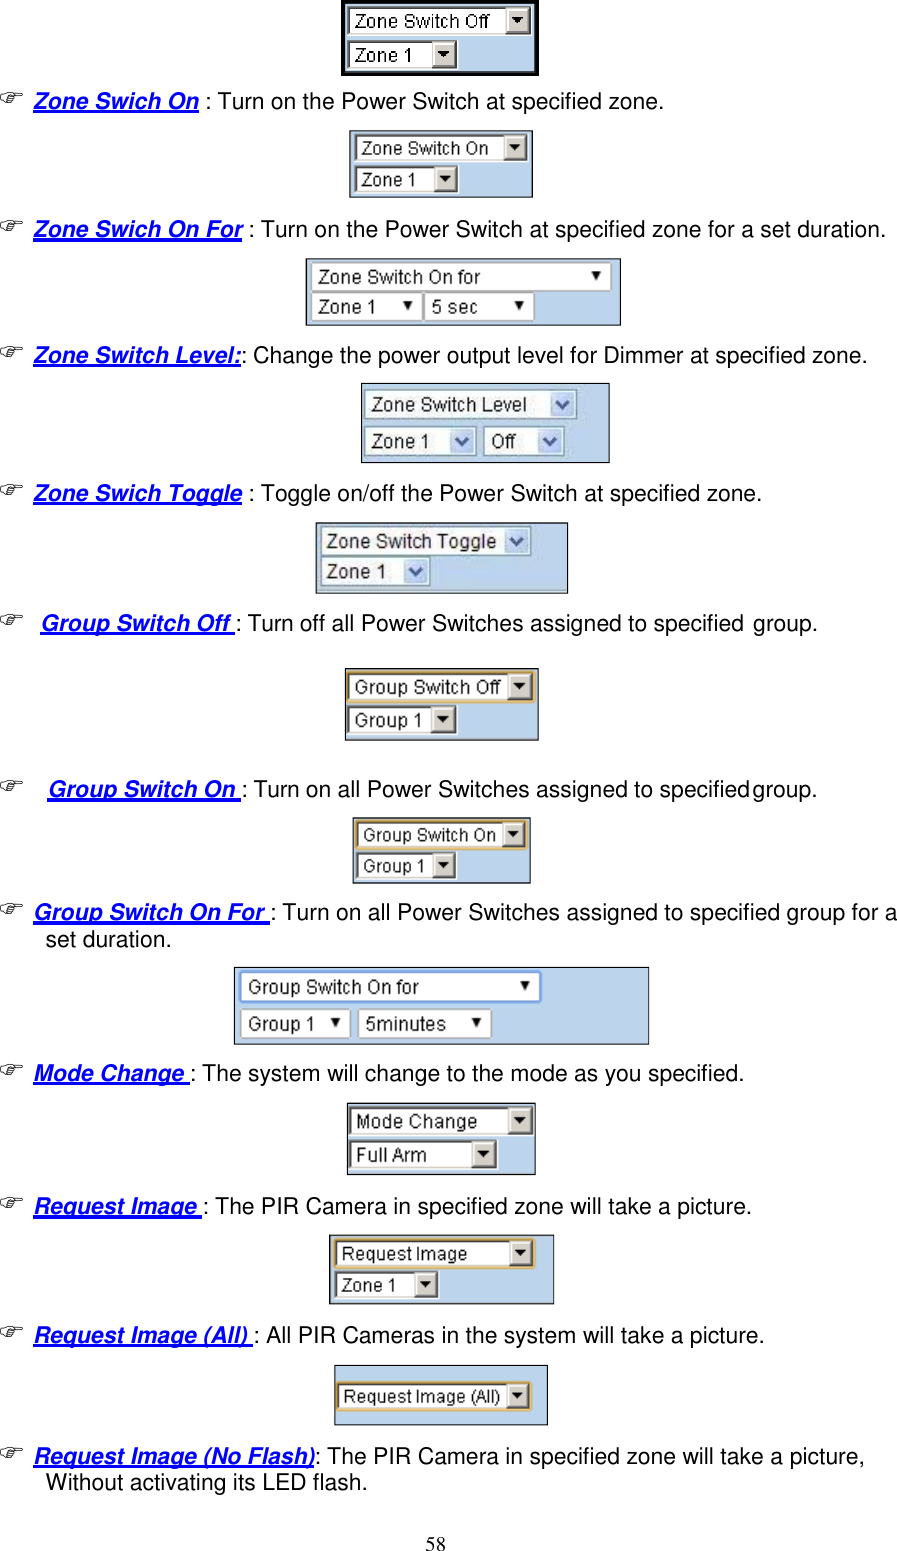 58    Zone Swich On : Turn on the Power Switch at specified zone.   Zone Swich On For : Turn on the Power Switch at specified zone for a set duration.   Zone Switch Level:: Change the power output level for Dimmer at specified zone.  Zone Swich Toggle : Toggle on/off the Power Switch at specified zone.    Group Switch Off : Turn off all Power Switches assigned to specified group.      Group Switch On : Turn on all Power Switches assigned to specified group.  Group Switch On For : Turn on all Power Switches assigned to specified group for a set duration.   Mode Change : The system will change to the mode as you specified.   Request Image : The PIR Camera in specified zone will take a picture.  Request Image (All) : All PIR Cameras in the system will take a picture.   Request Image (No Flash): The PIR Camera in specified zone will take a picture, Without activating its LED flash. 